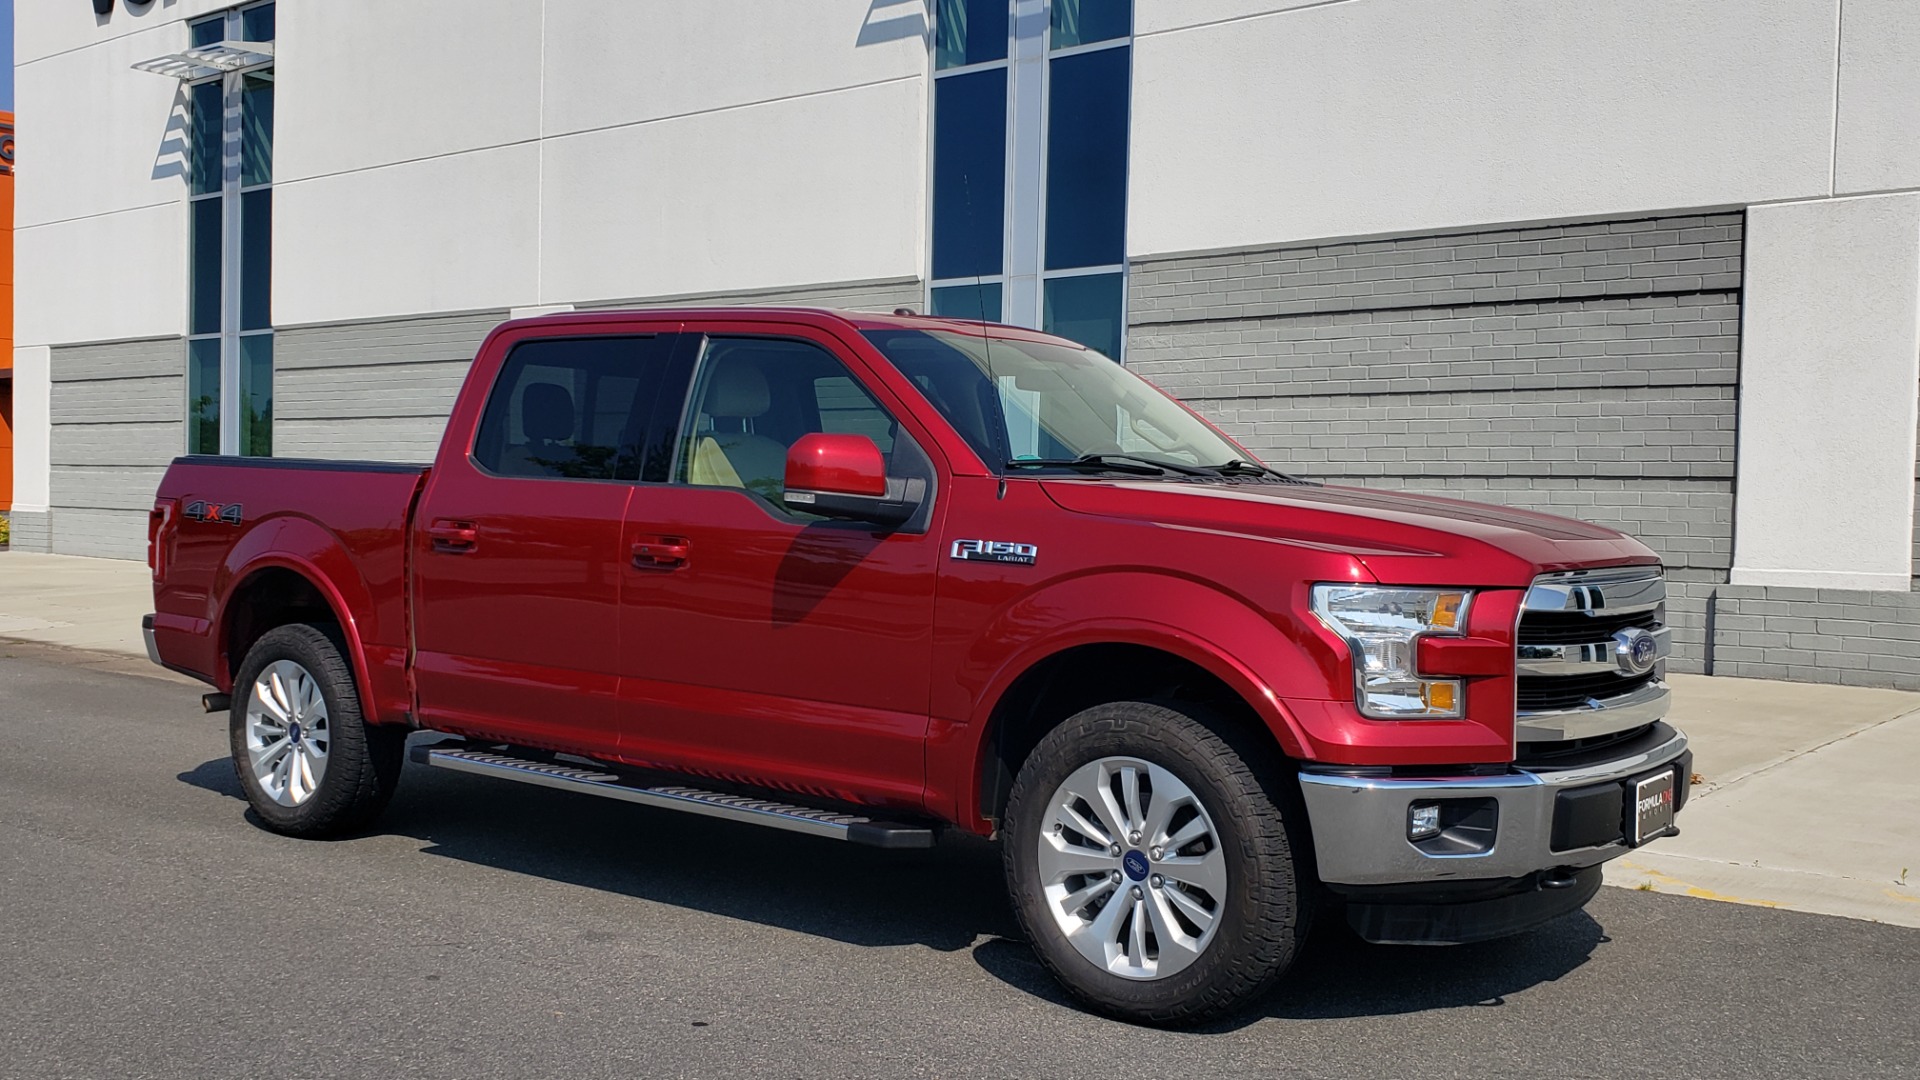 Used 2015 Ford F-150 LARIAT 4X4 SUPERCREW / 5.0L V8 / AUTO / NAV / SUNROOF / REARVIEW for sale Sold at Formula Imports in Charlotte NC 28227 7